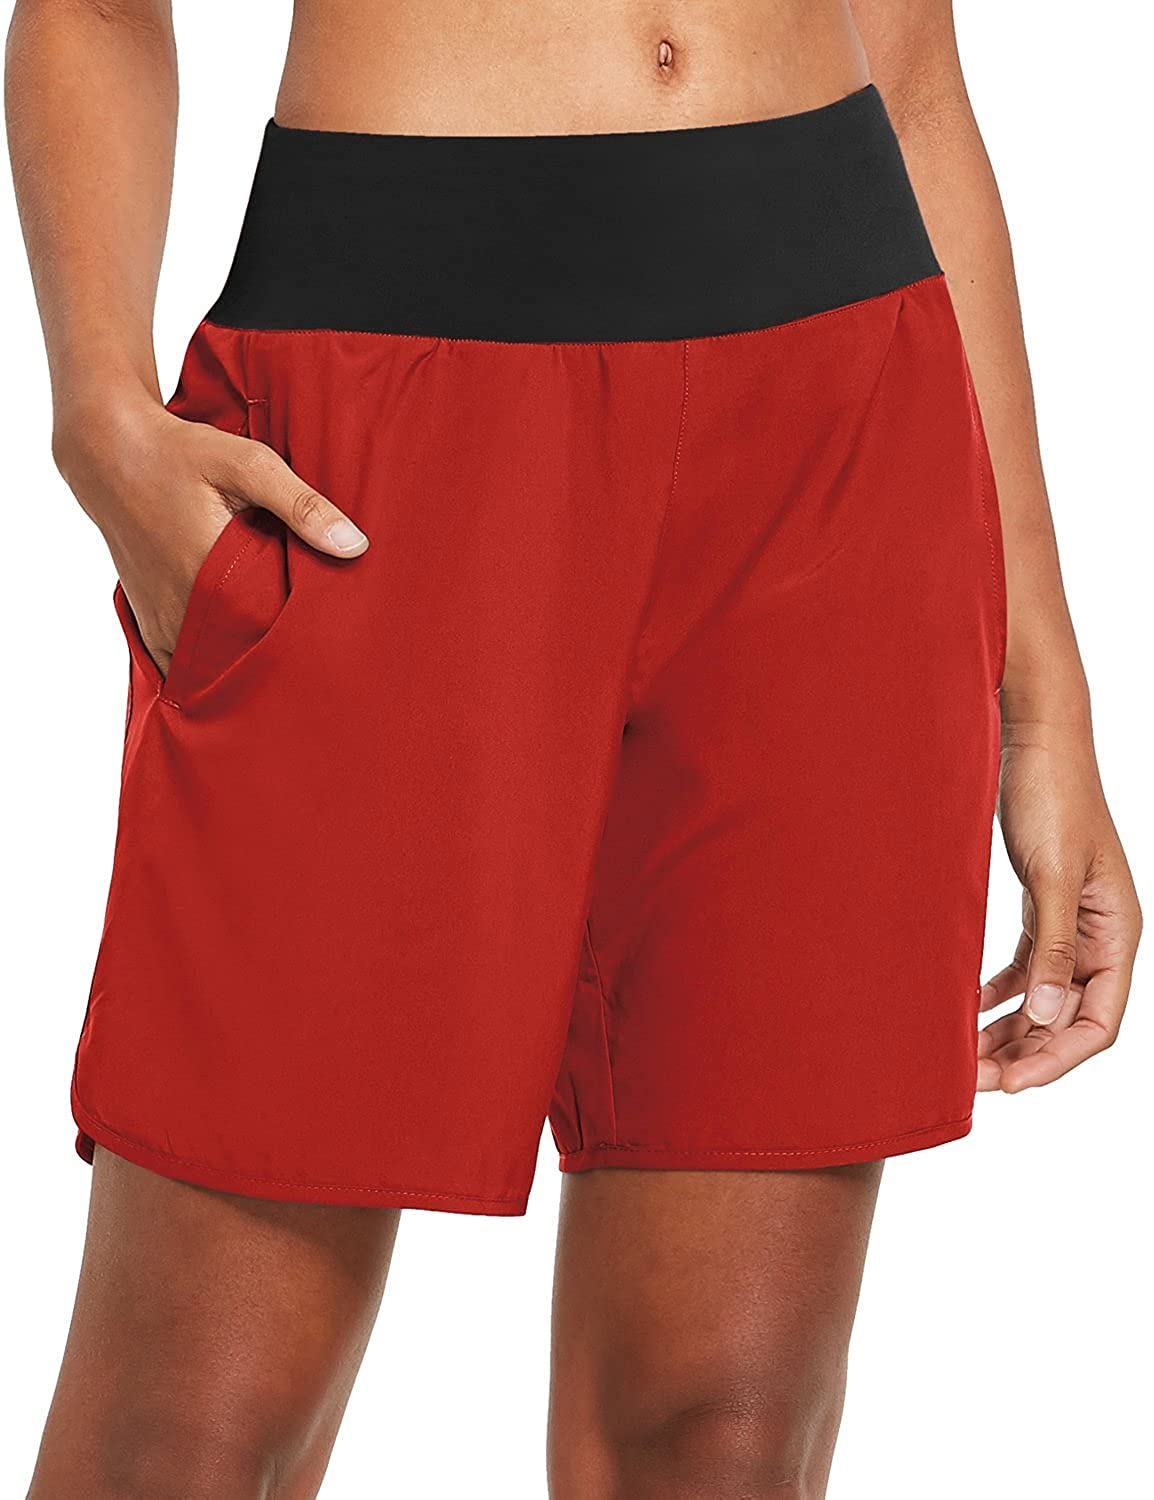 BALEAF Women's 7 Inches Long Running Shorts with Liner Lounge Sport Gym  Shorts B